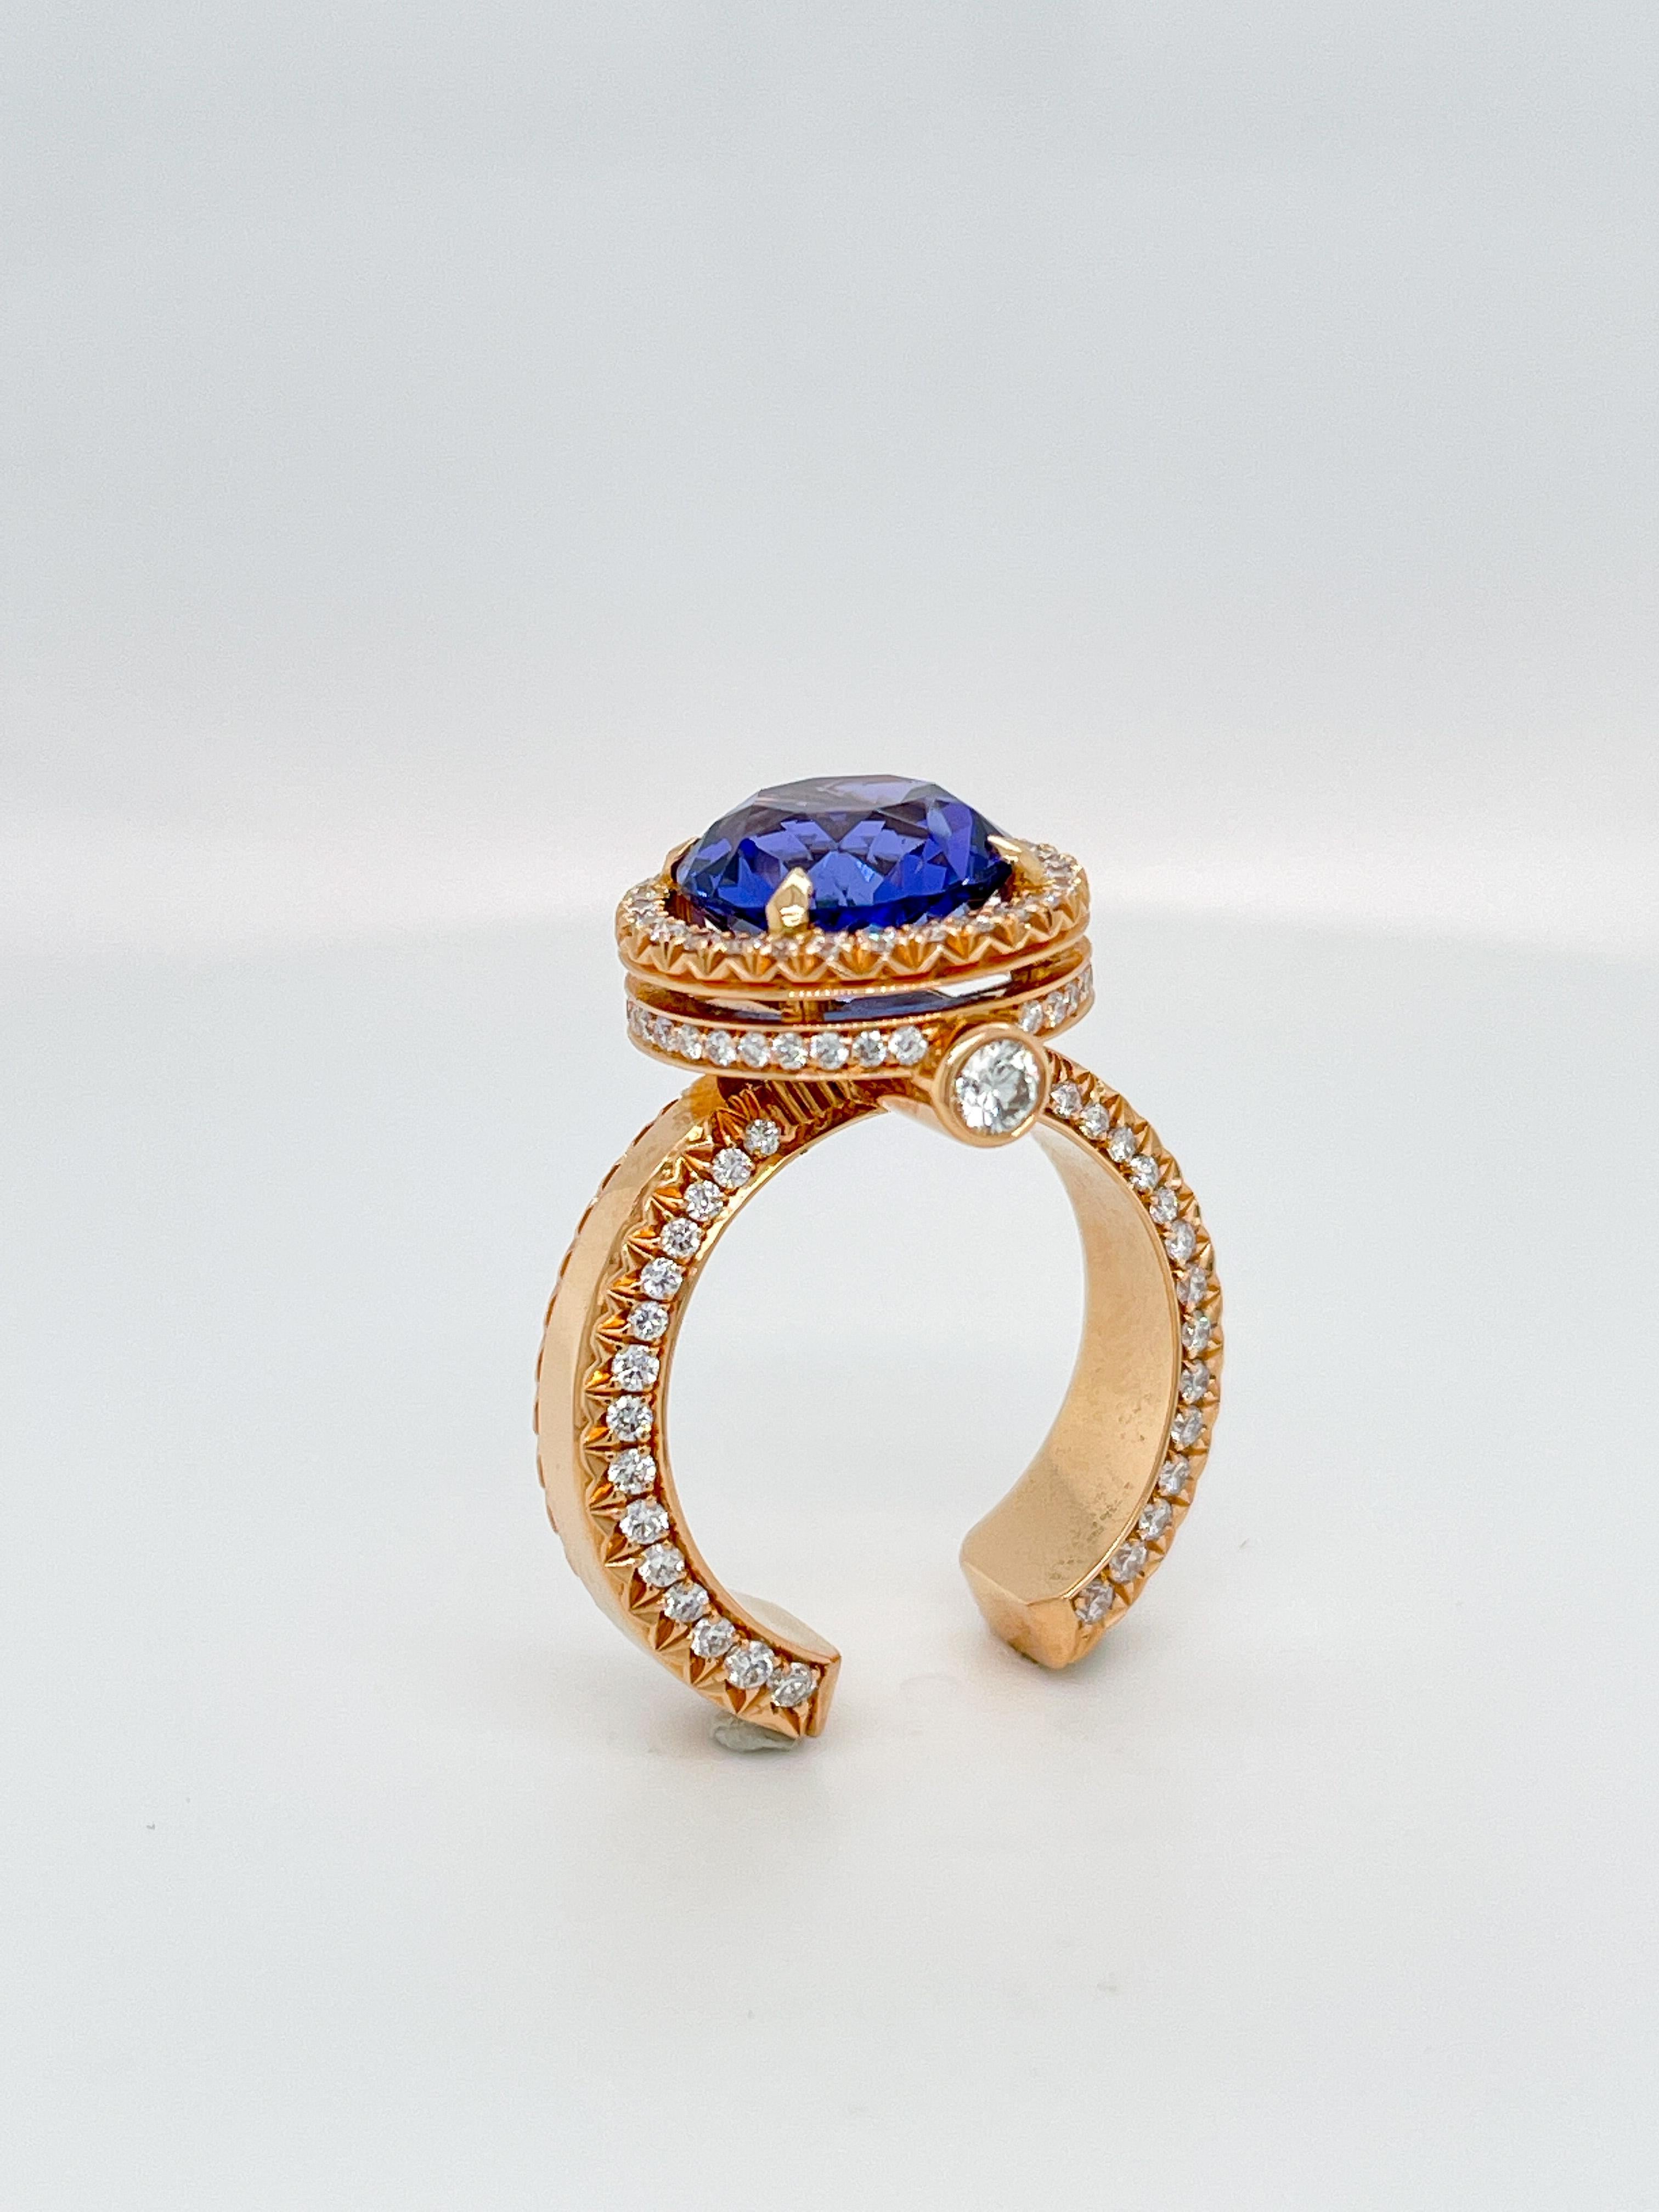 18 Karat Yellow Gold Cocktail Ring featuring a 4.75 Carat Deep Purple Tanzanite stone.

Round Mixed cut diameter 9,51 mm
The Tanzanite is set with Collection Grade Diamonds weighing 1.70 ct.

This ring is one of Jochen Leën's Amnesia Collection with